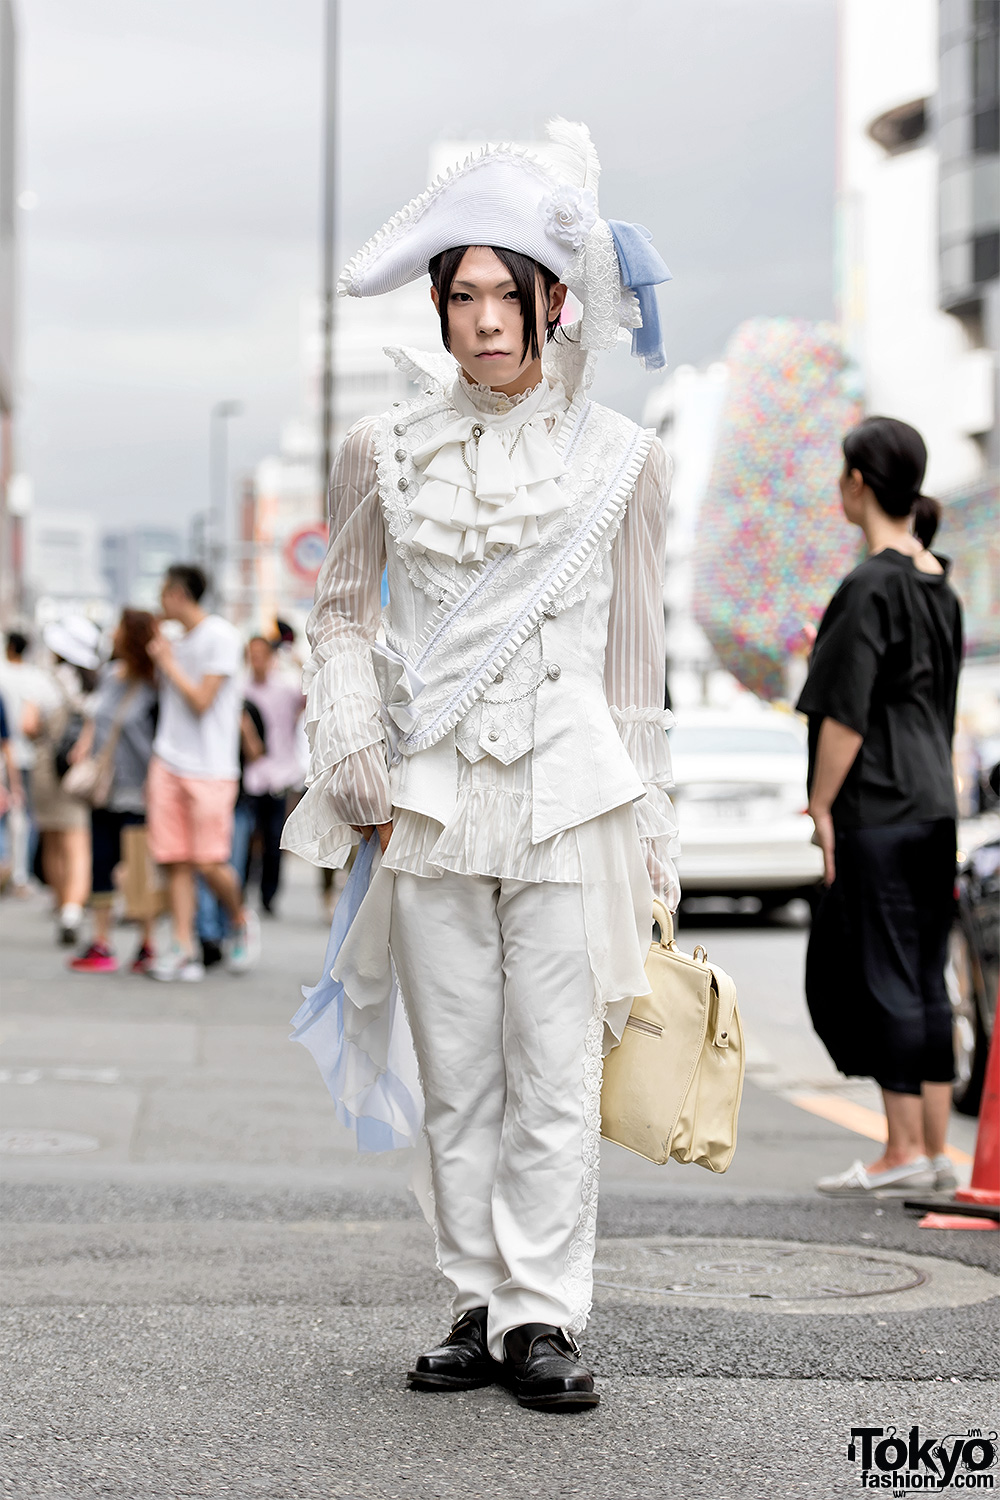 White Pirate Inspired Fashion by Japanese Brand Alice and The Pirates in Harajuku